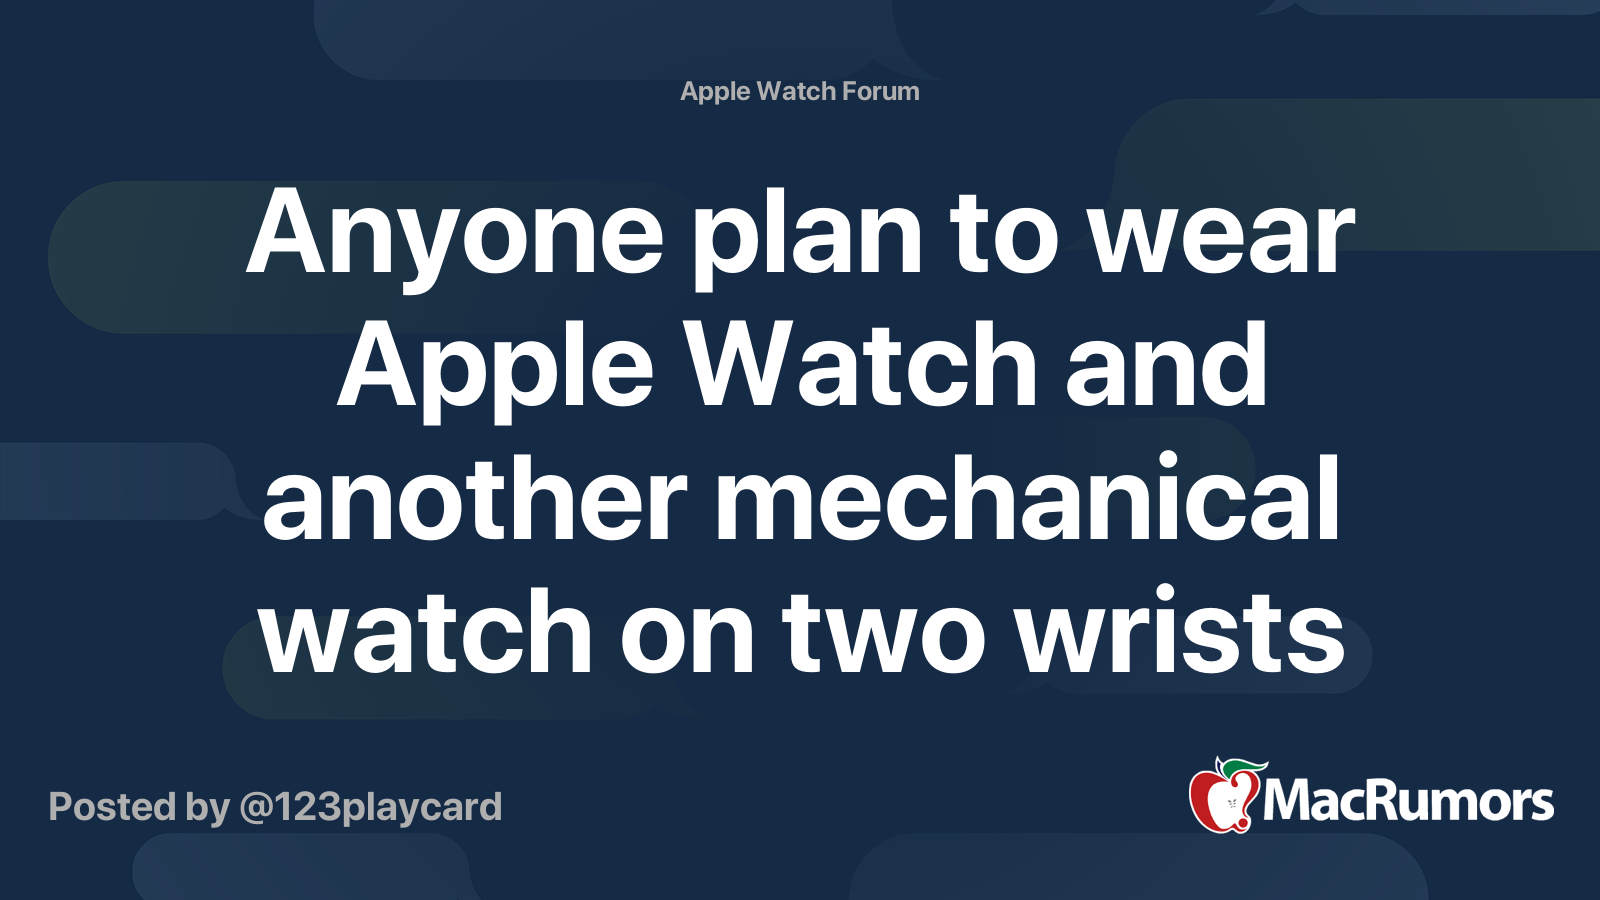 Anyone plan to wear Apple Watch and another mechanical watch on two wrists